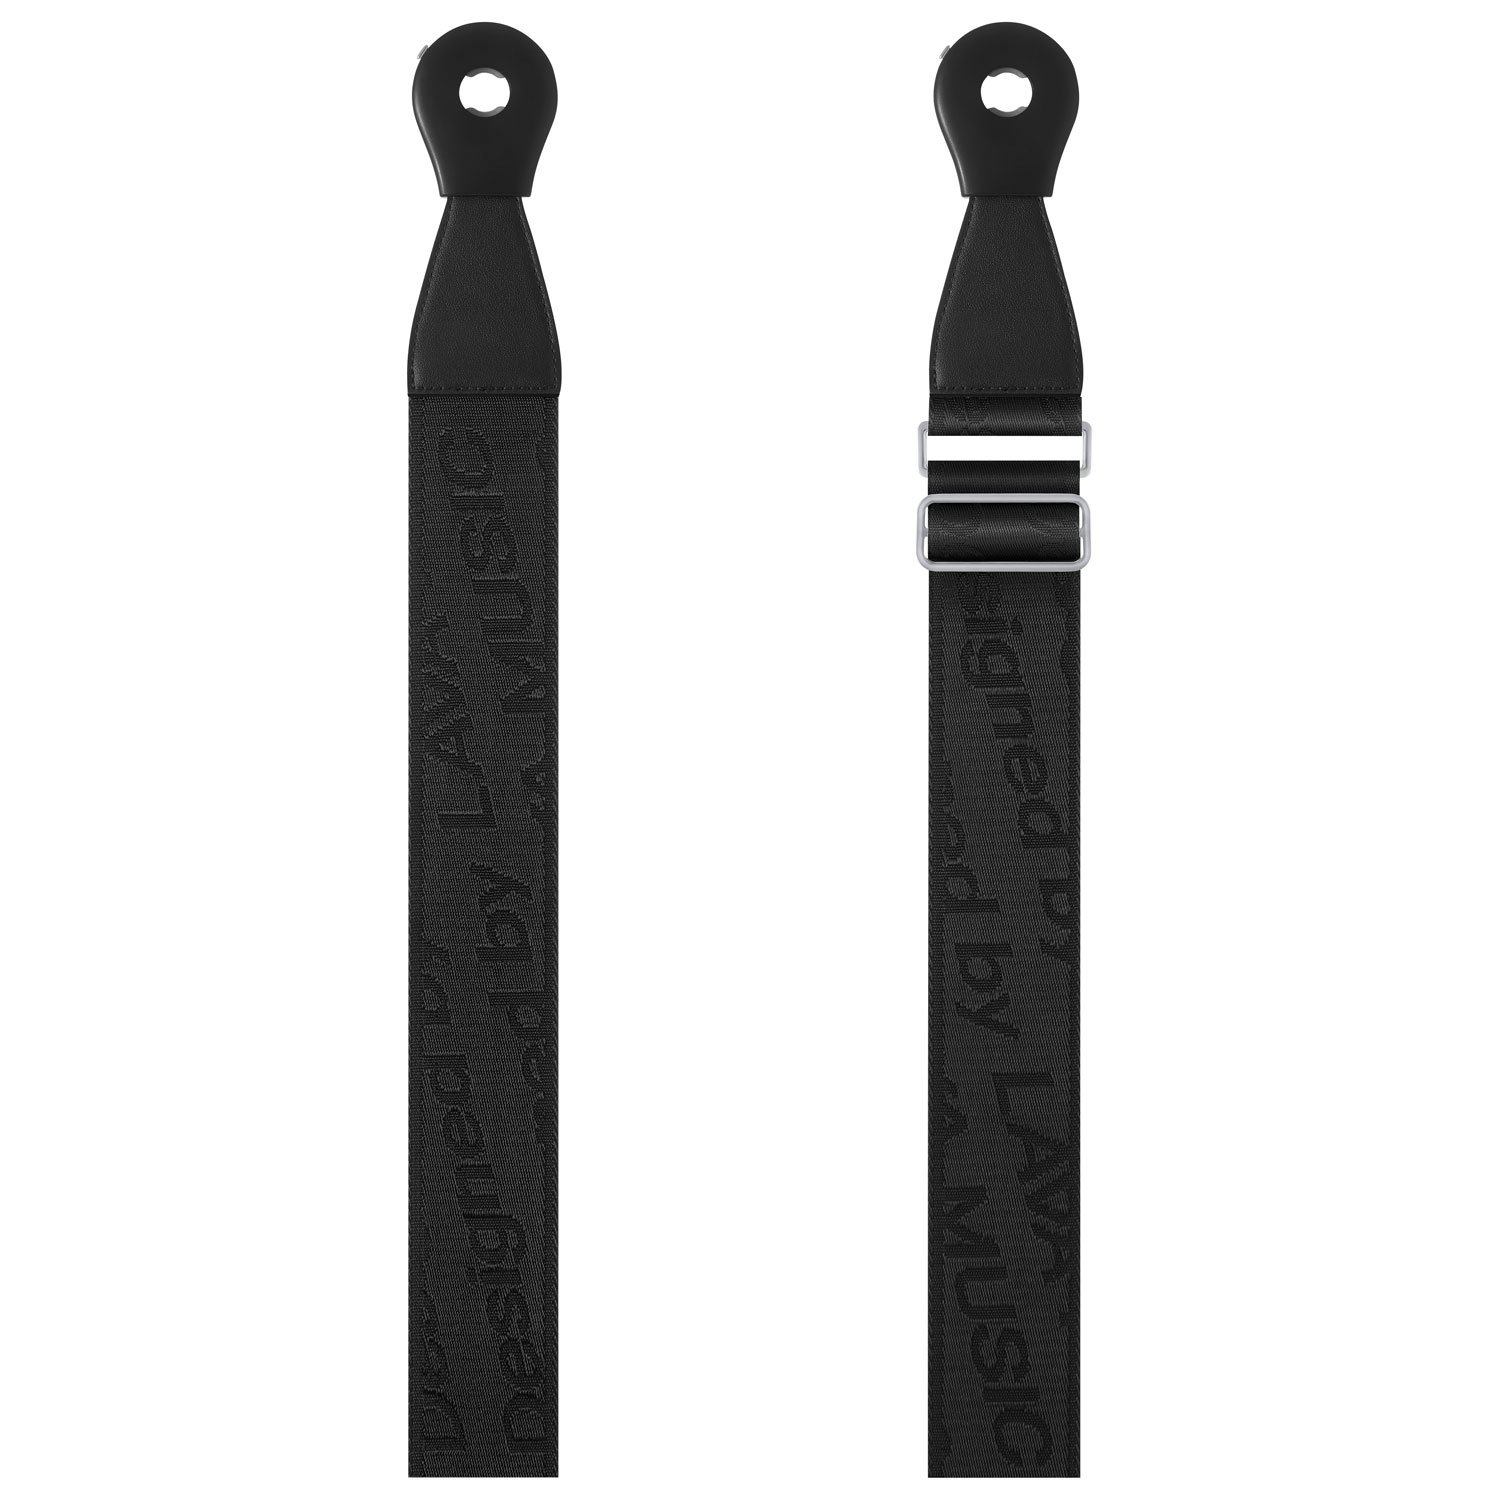 LAVA Ideal Strap 2 Guitar Strap for ME Play & Blue Touch - Black